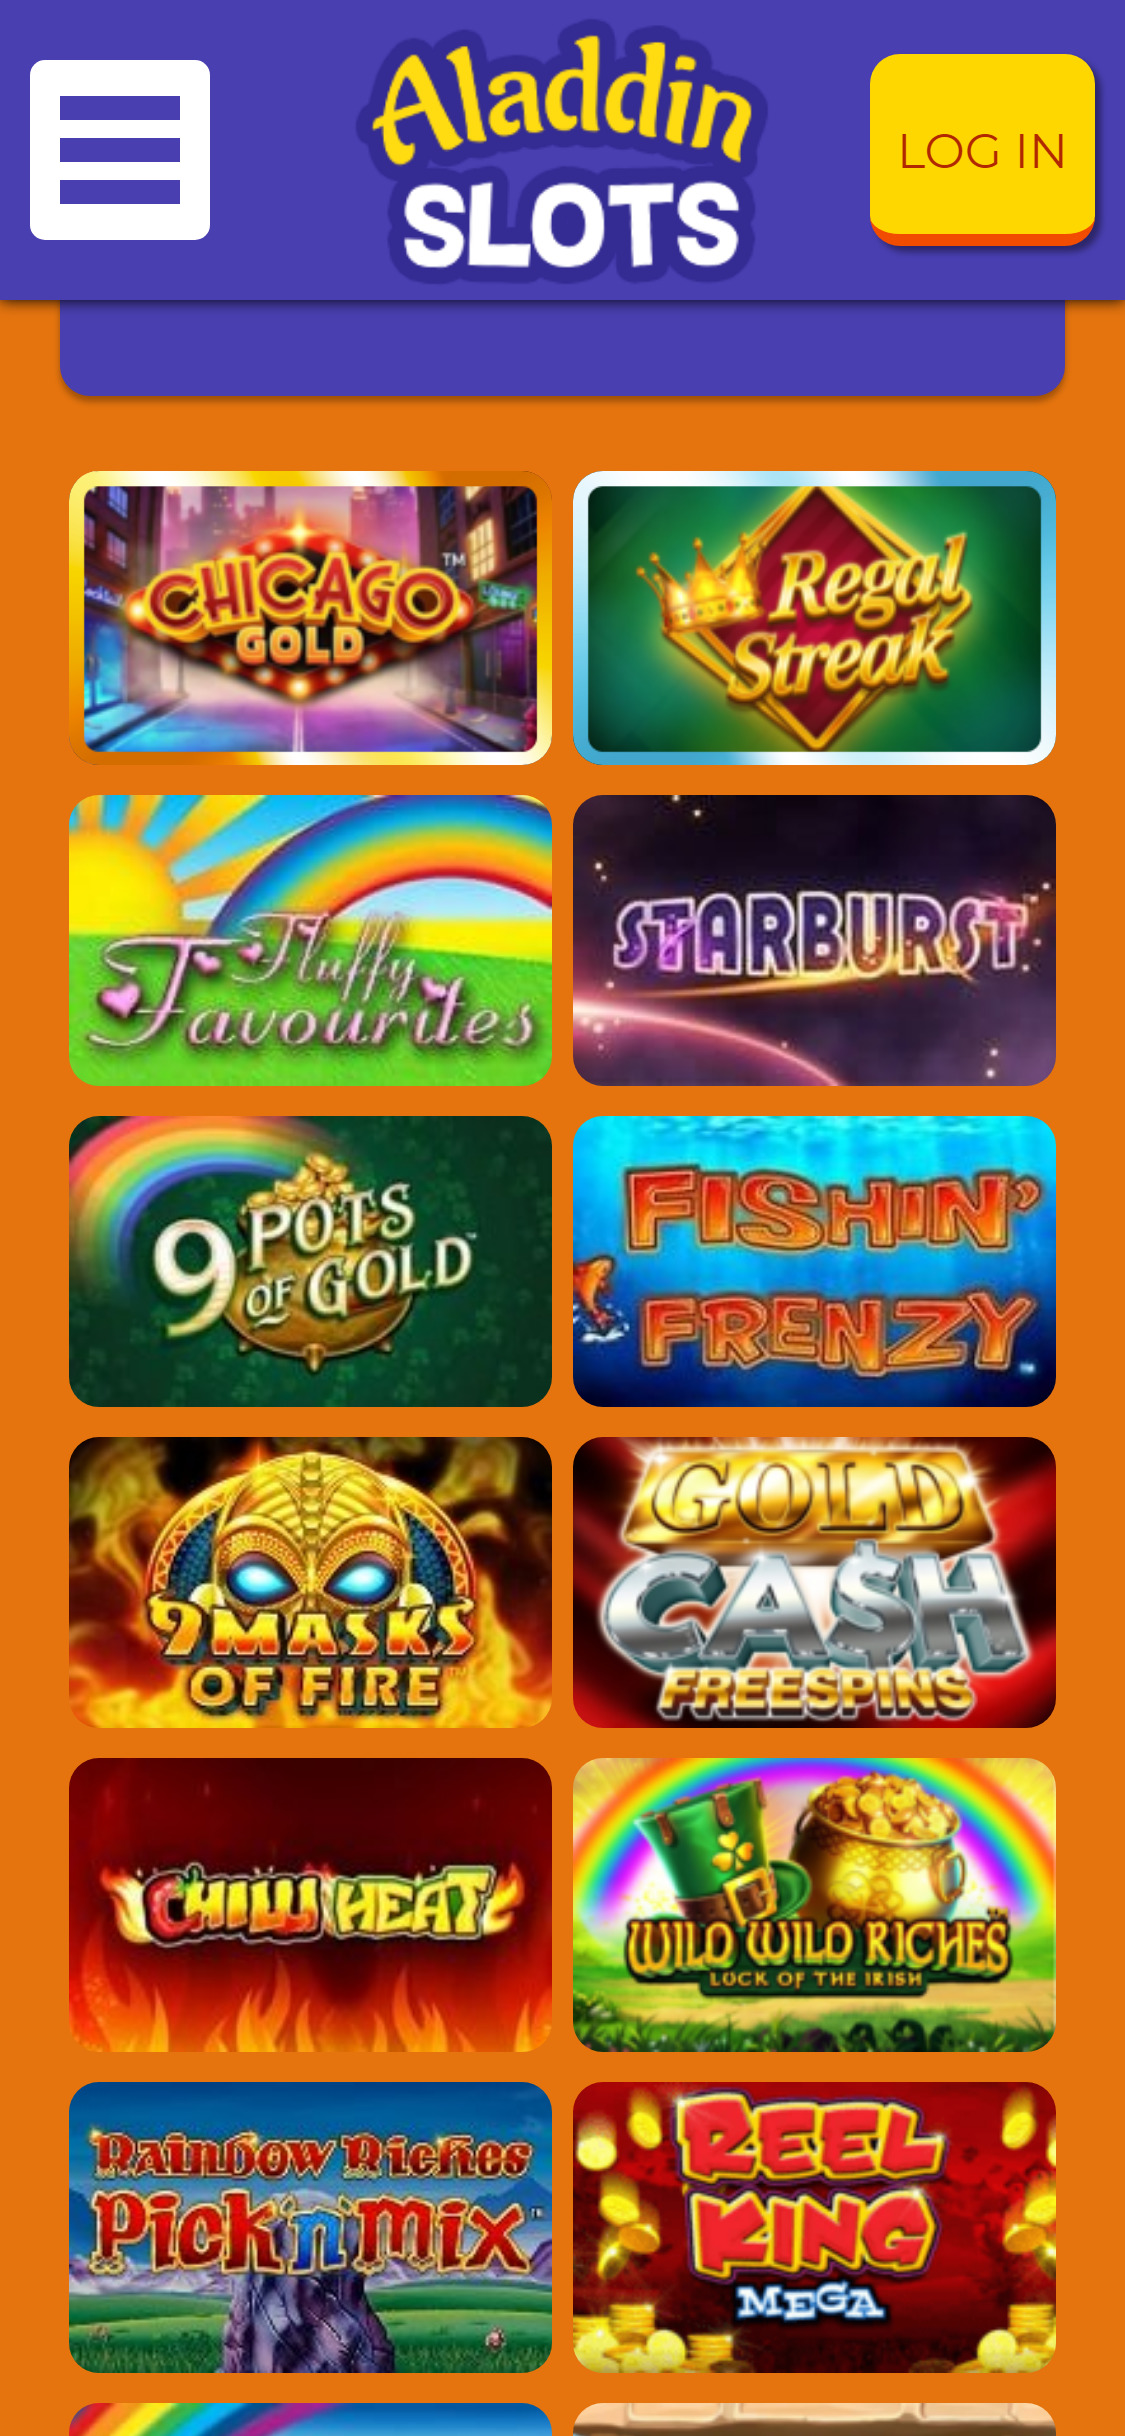 Payday Slots Casino Mobile Games Review